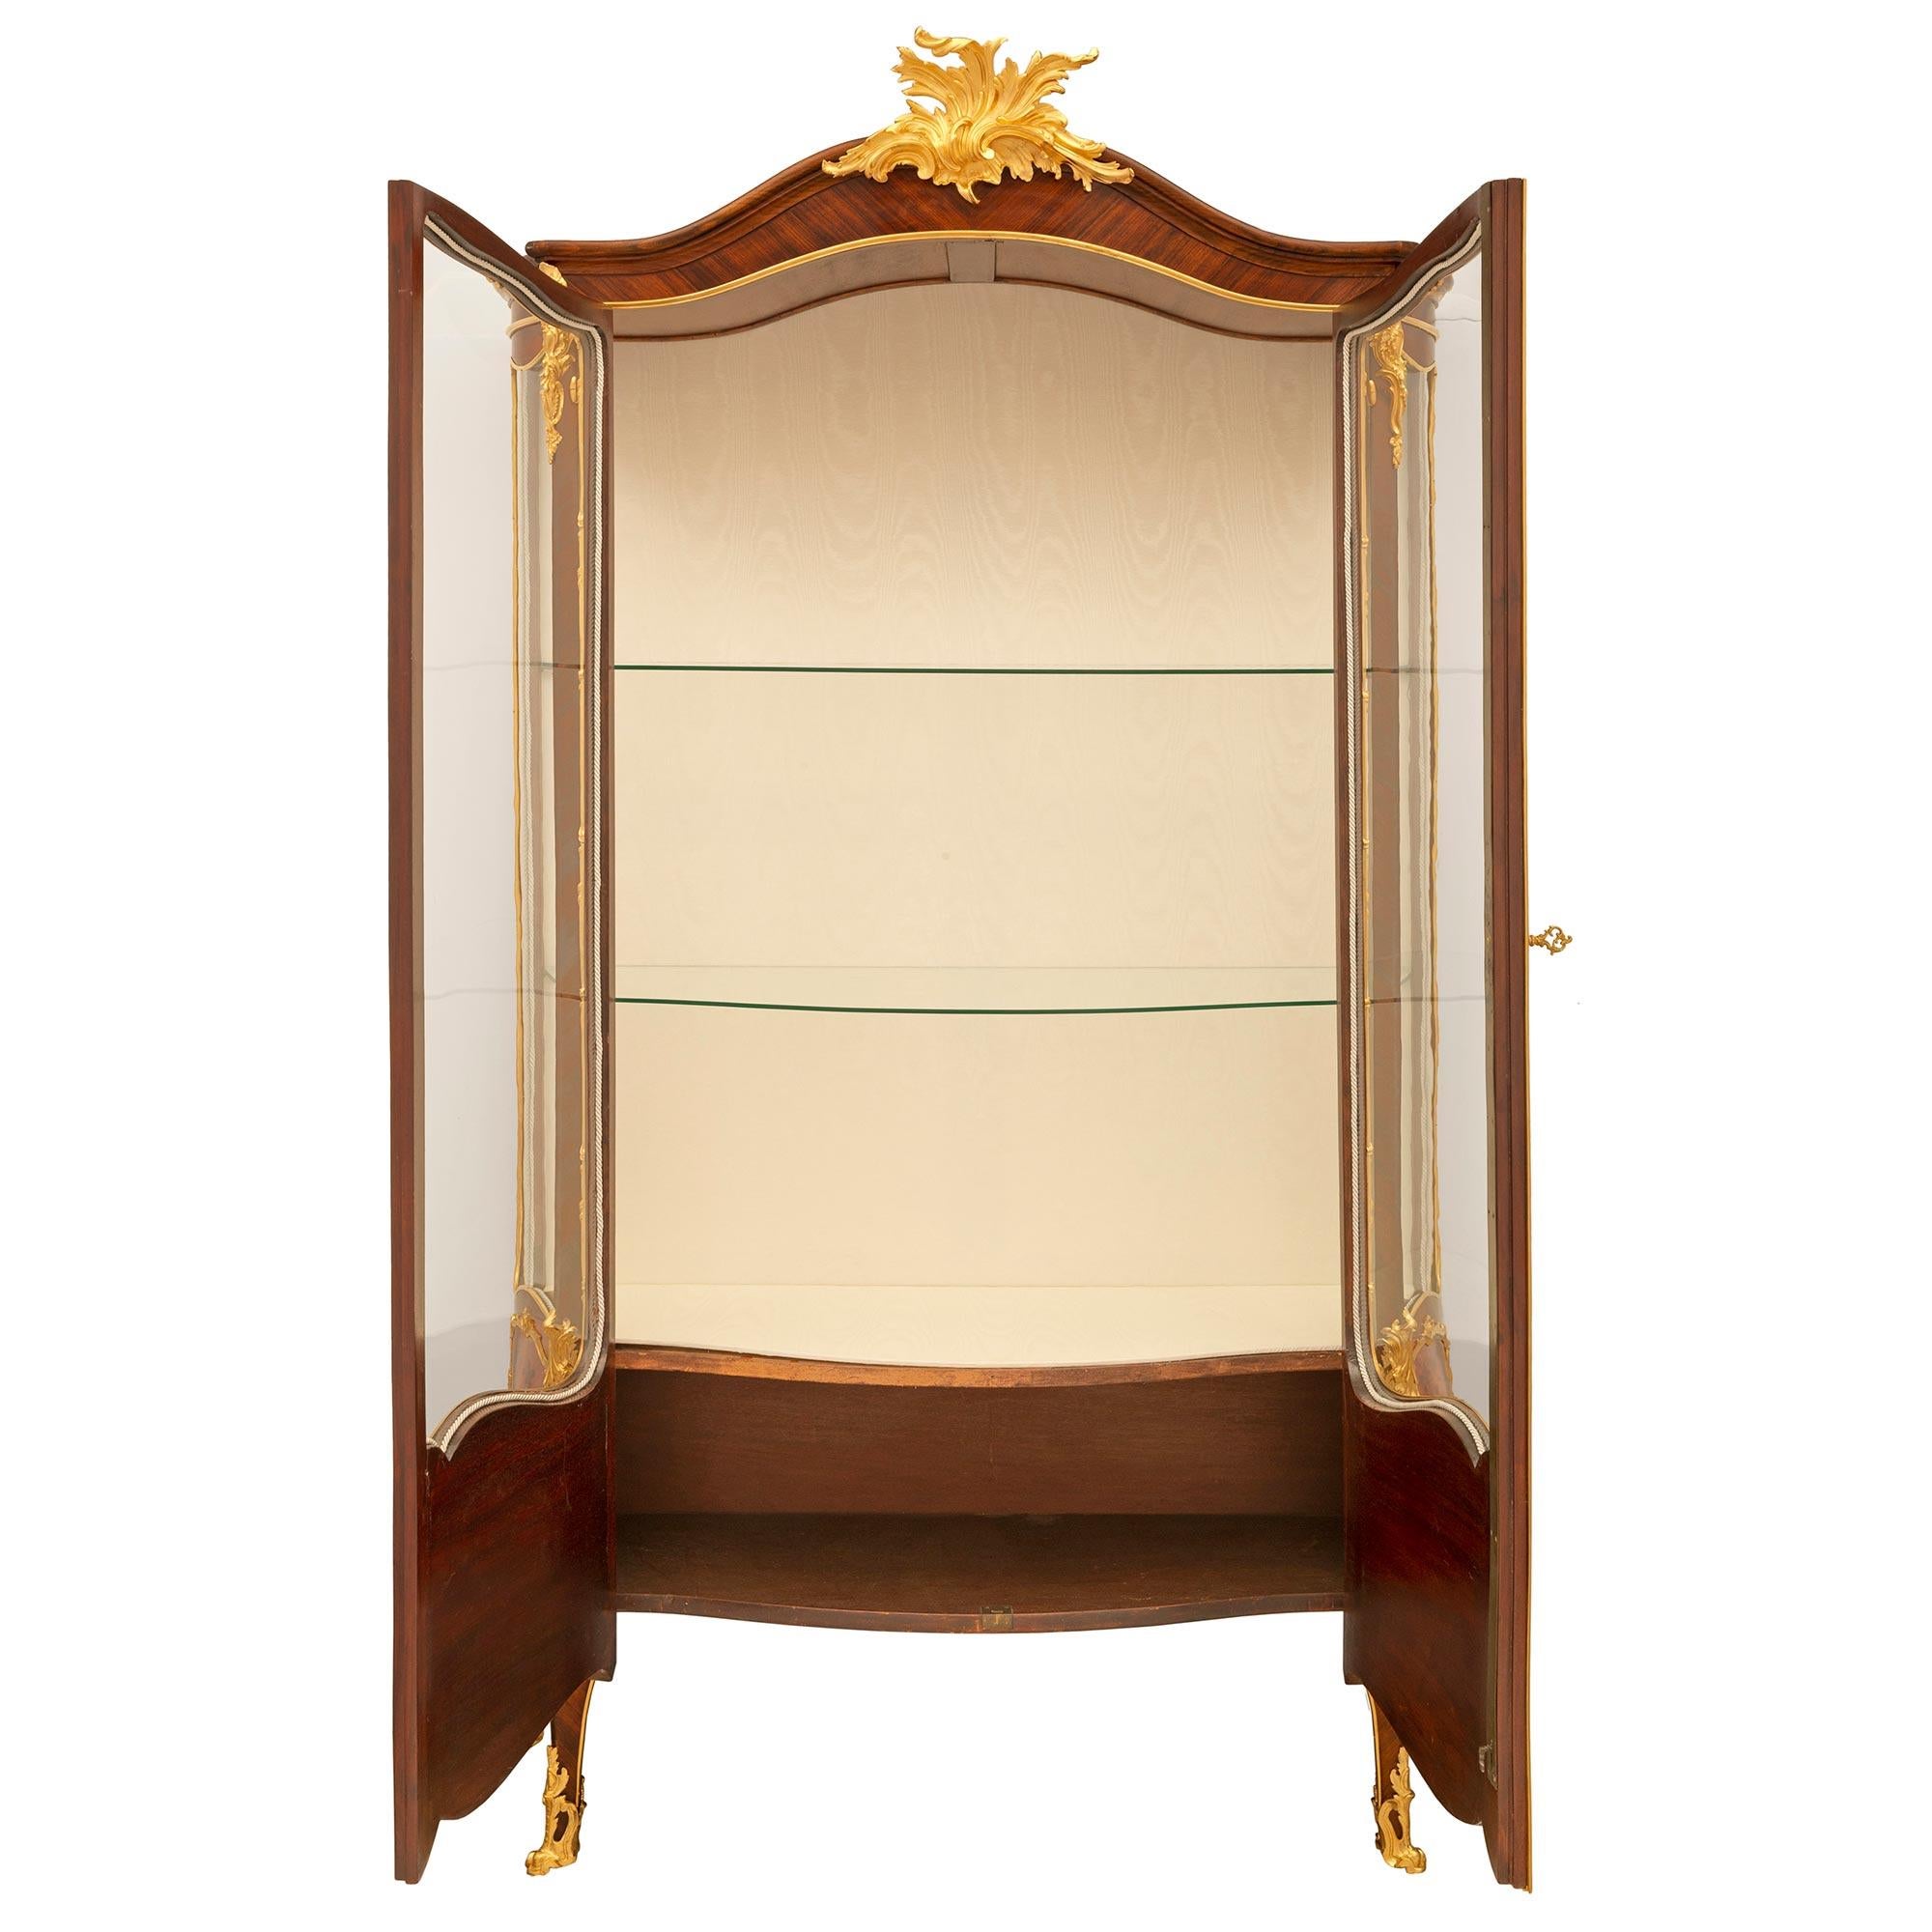 A stunning and extremely high quality French 19th century Louis XV st. Kingwood, Tulipwood, and ormolu cabinet vitrine attributed to François Linke. The two door cabinet is raised by elegant cabriole legs with superb pierced fitted foliate ormolu